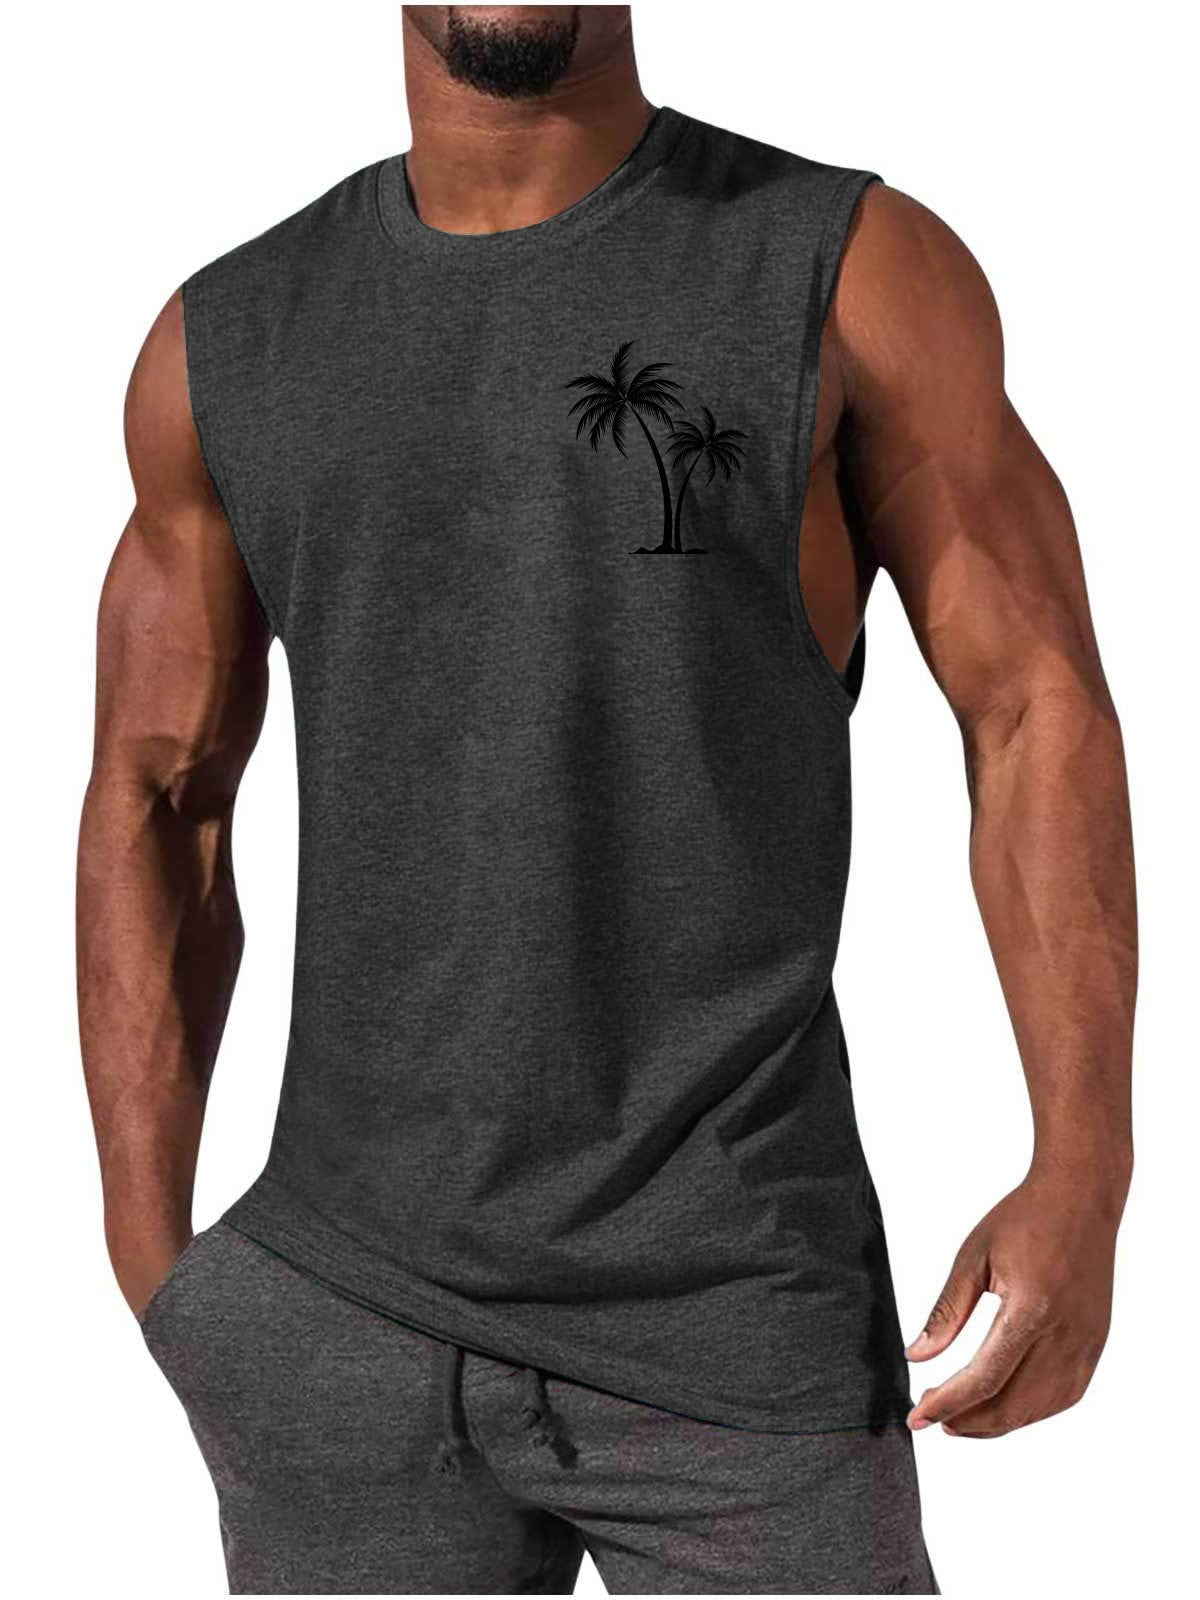 Coconut Tree Embroidery Vest Summer Beach Tank Tops apparel & accessories